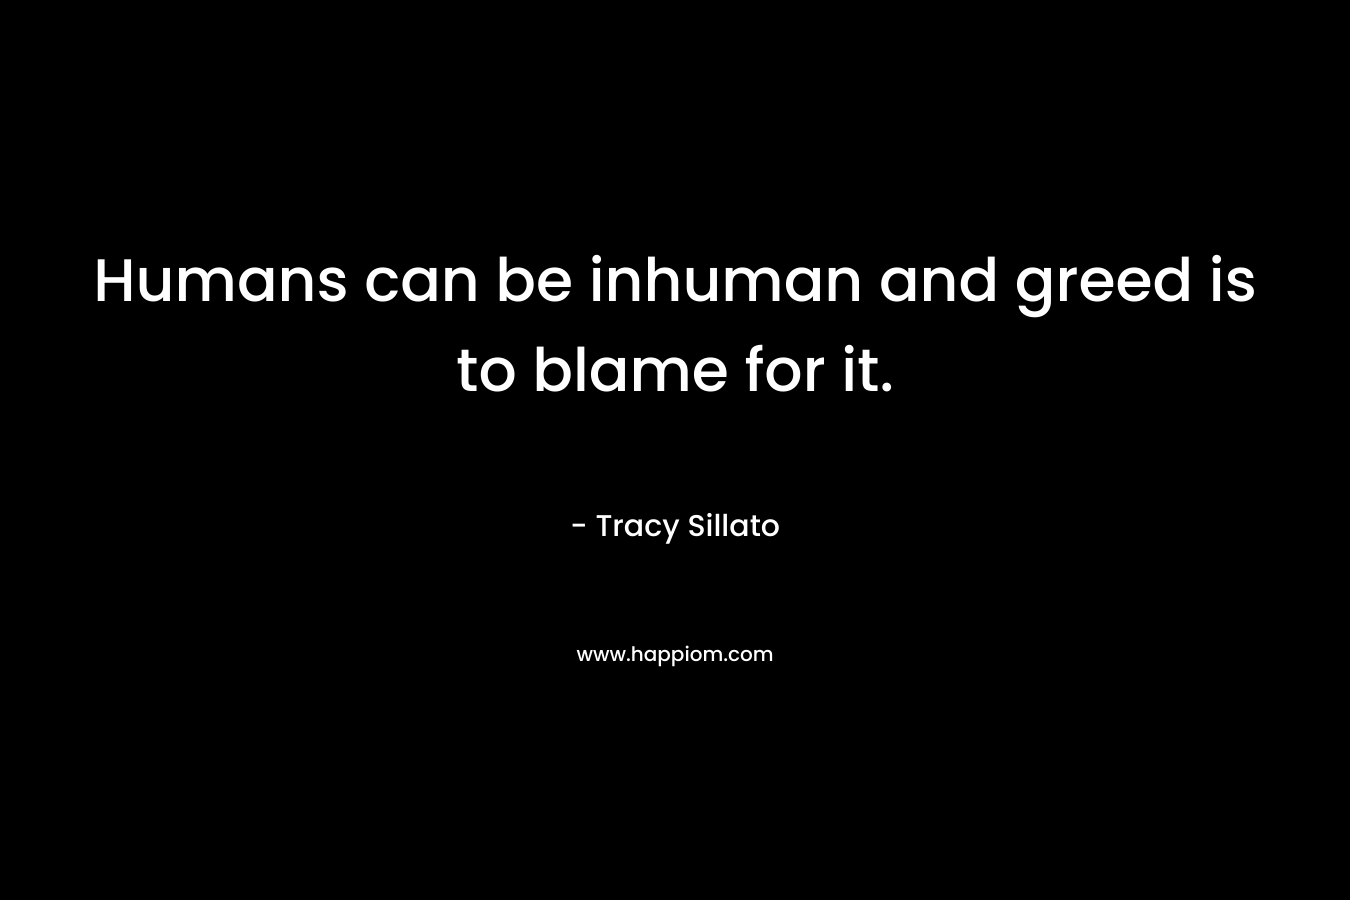 Humans can be inhuman and greed is to blame for it.